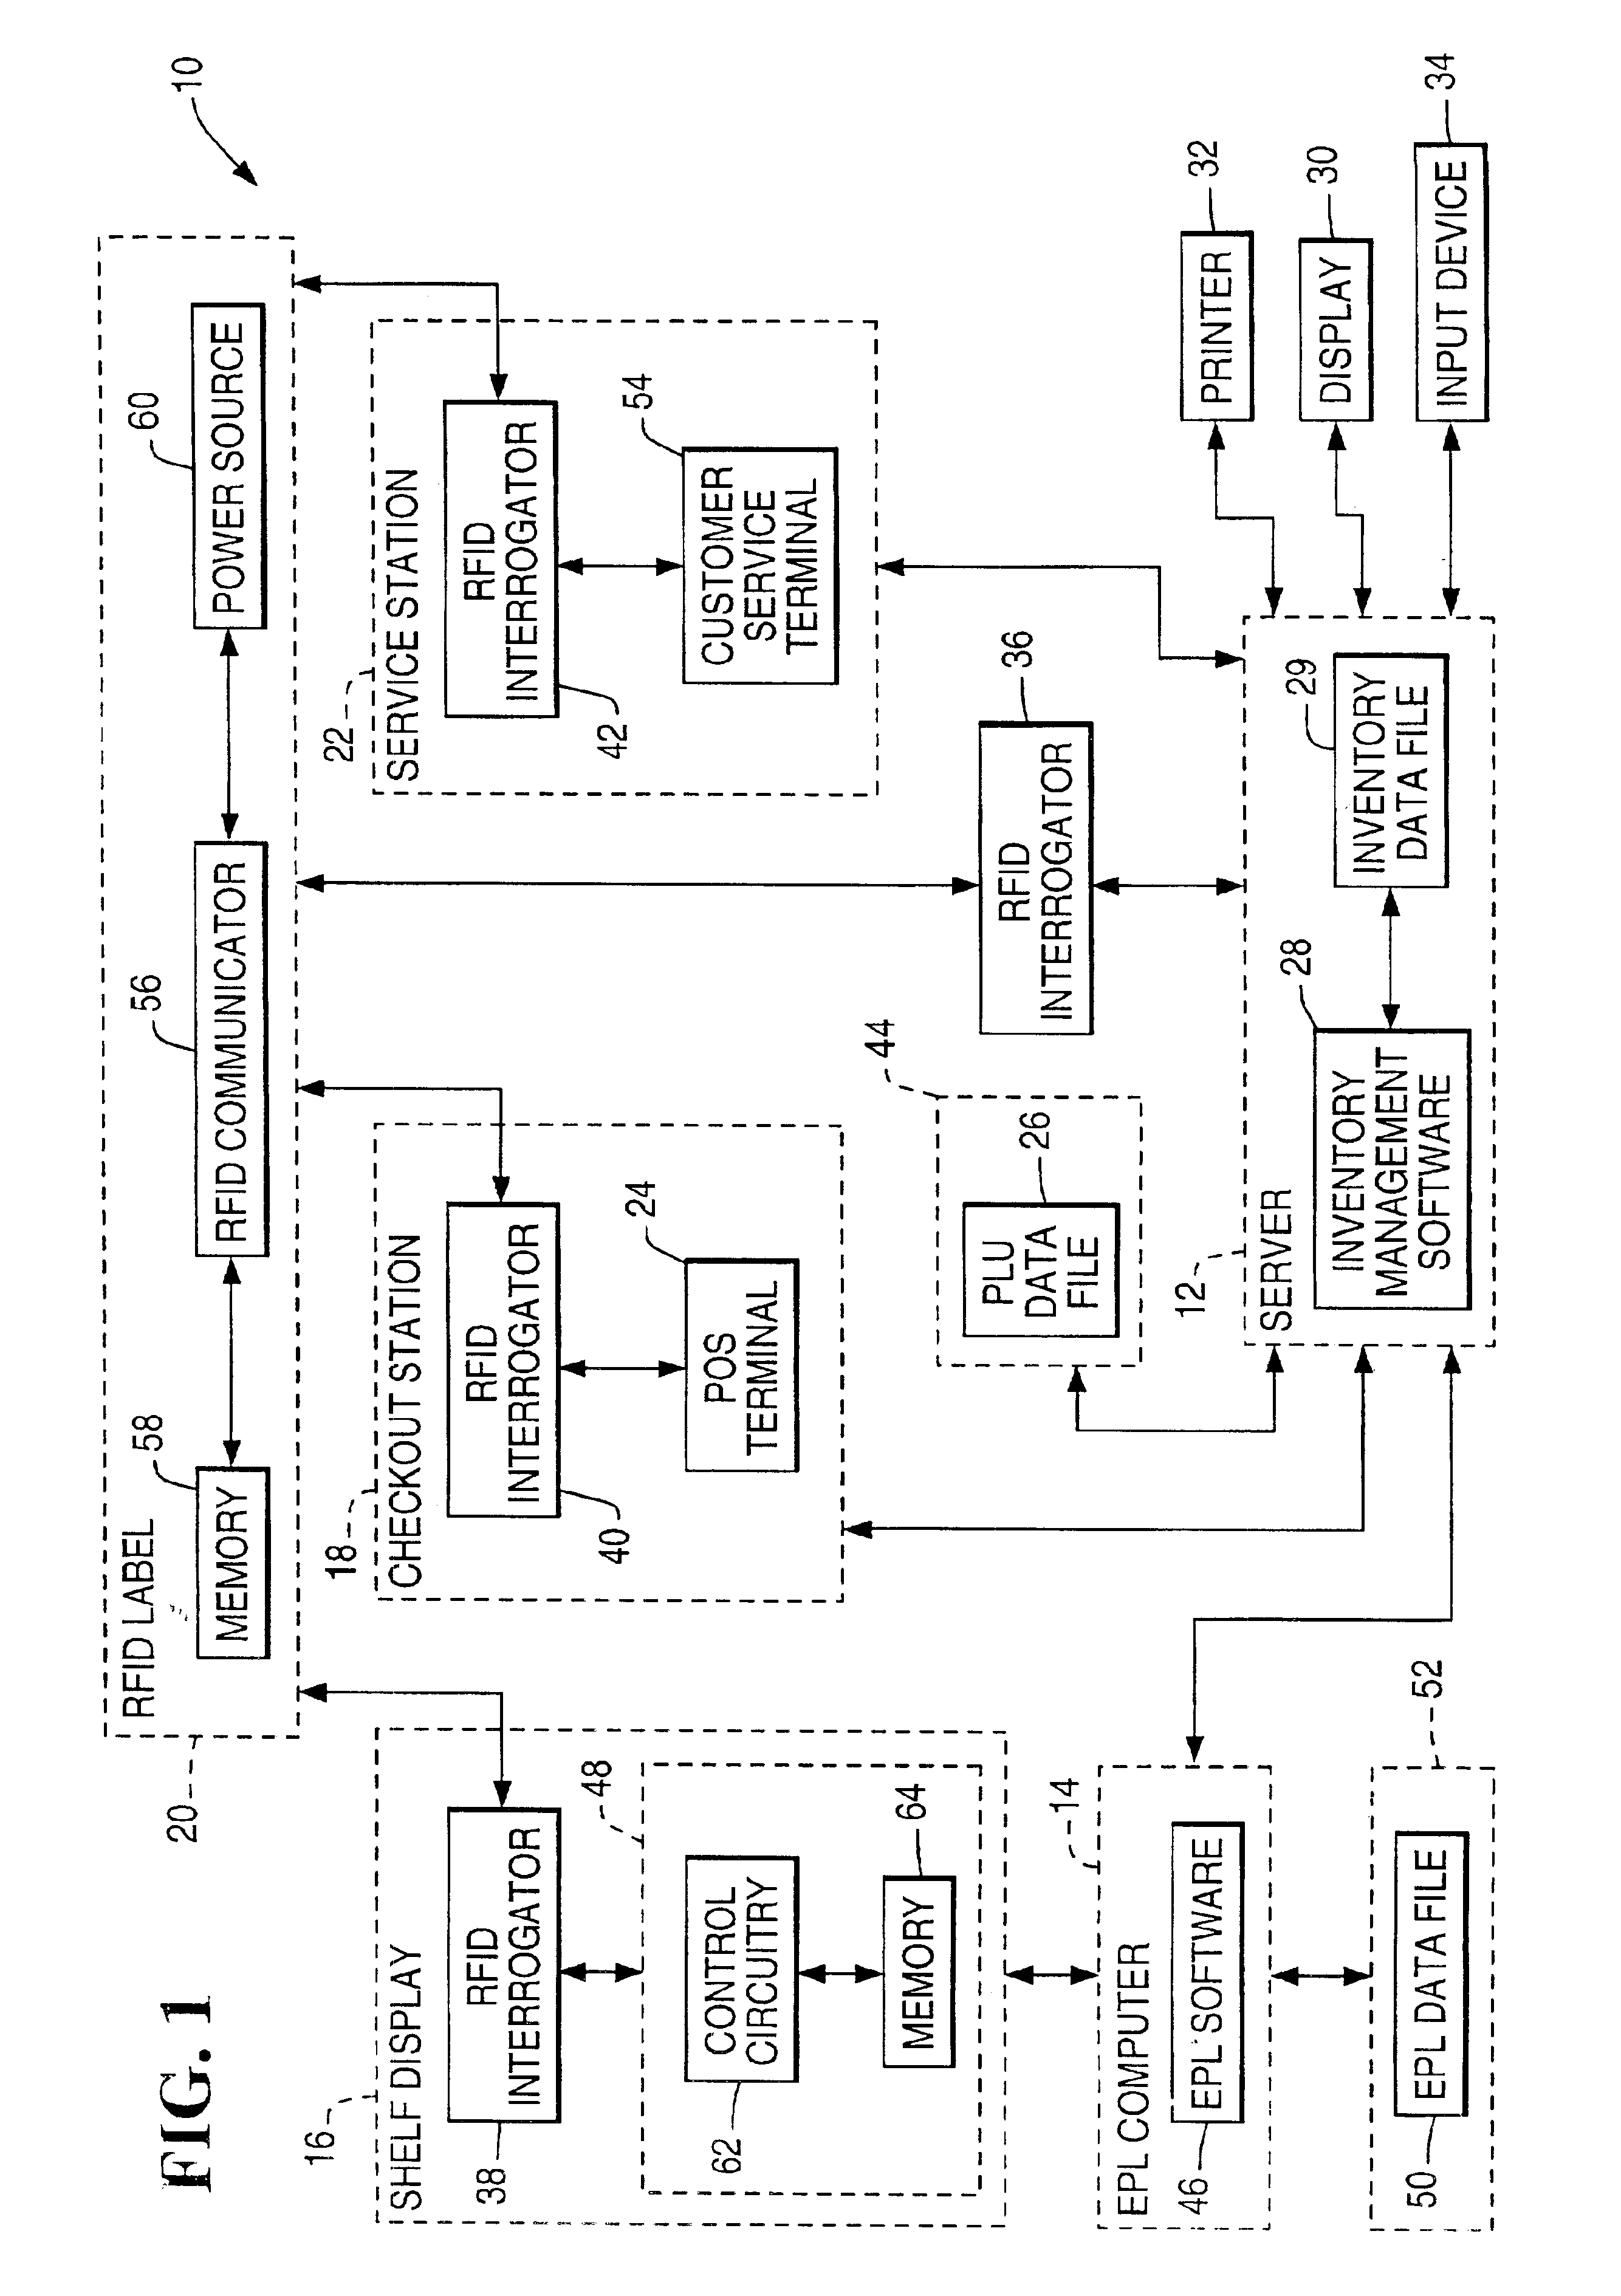 System and method of managing inventory